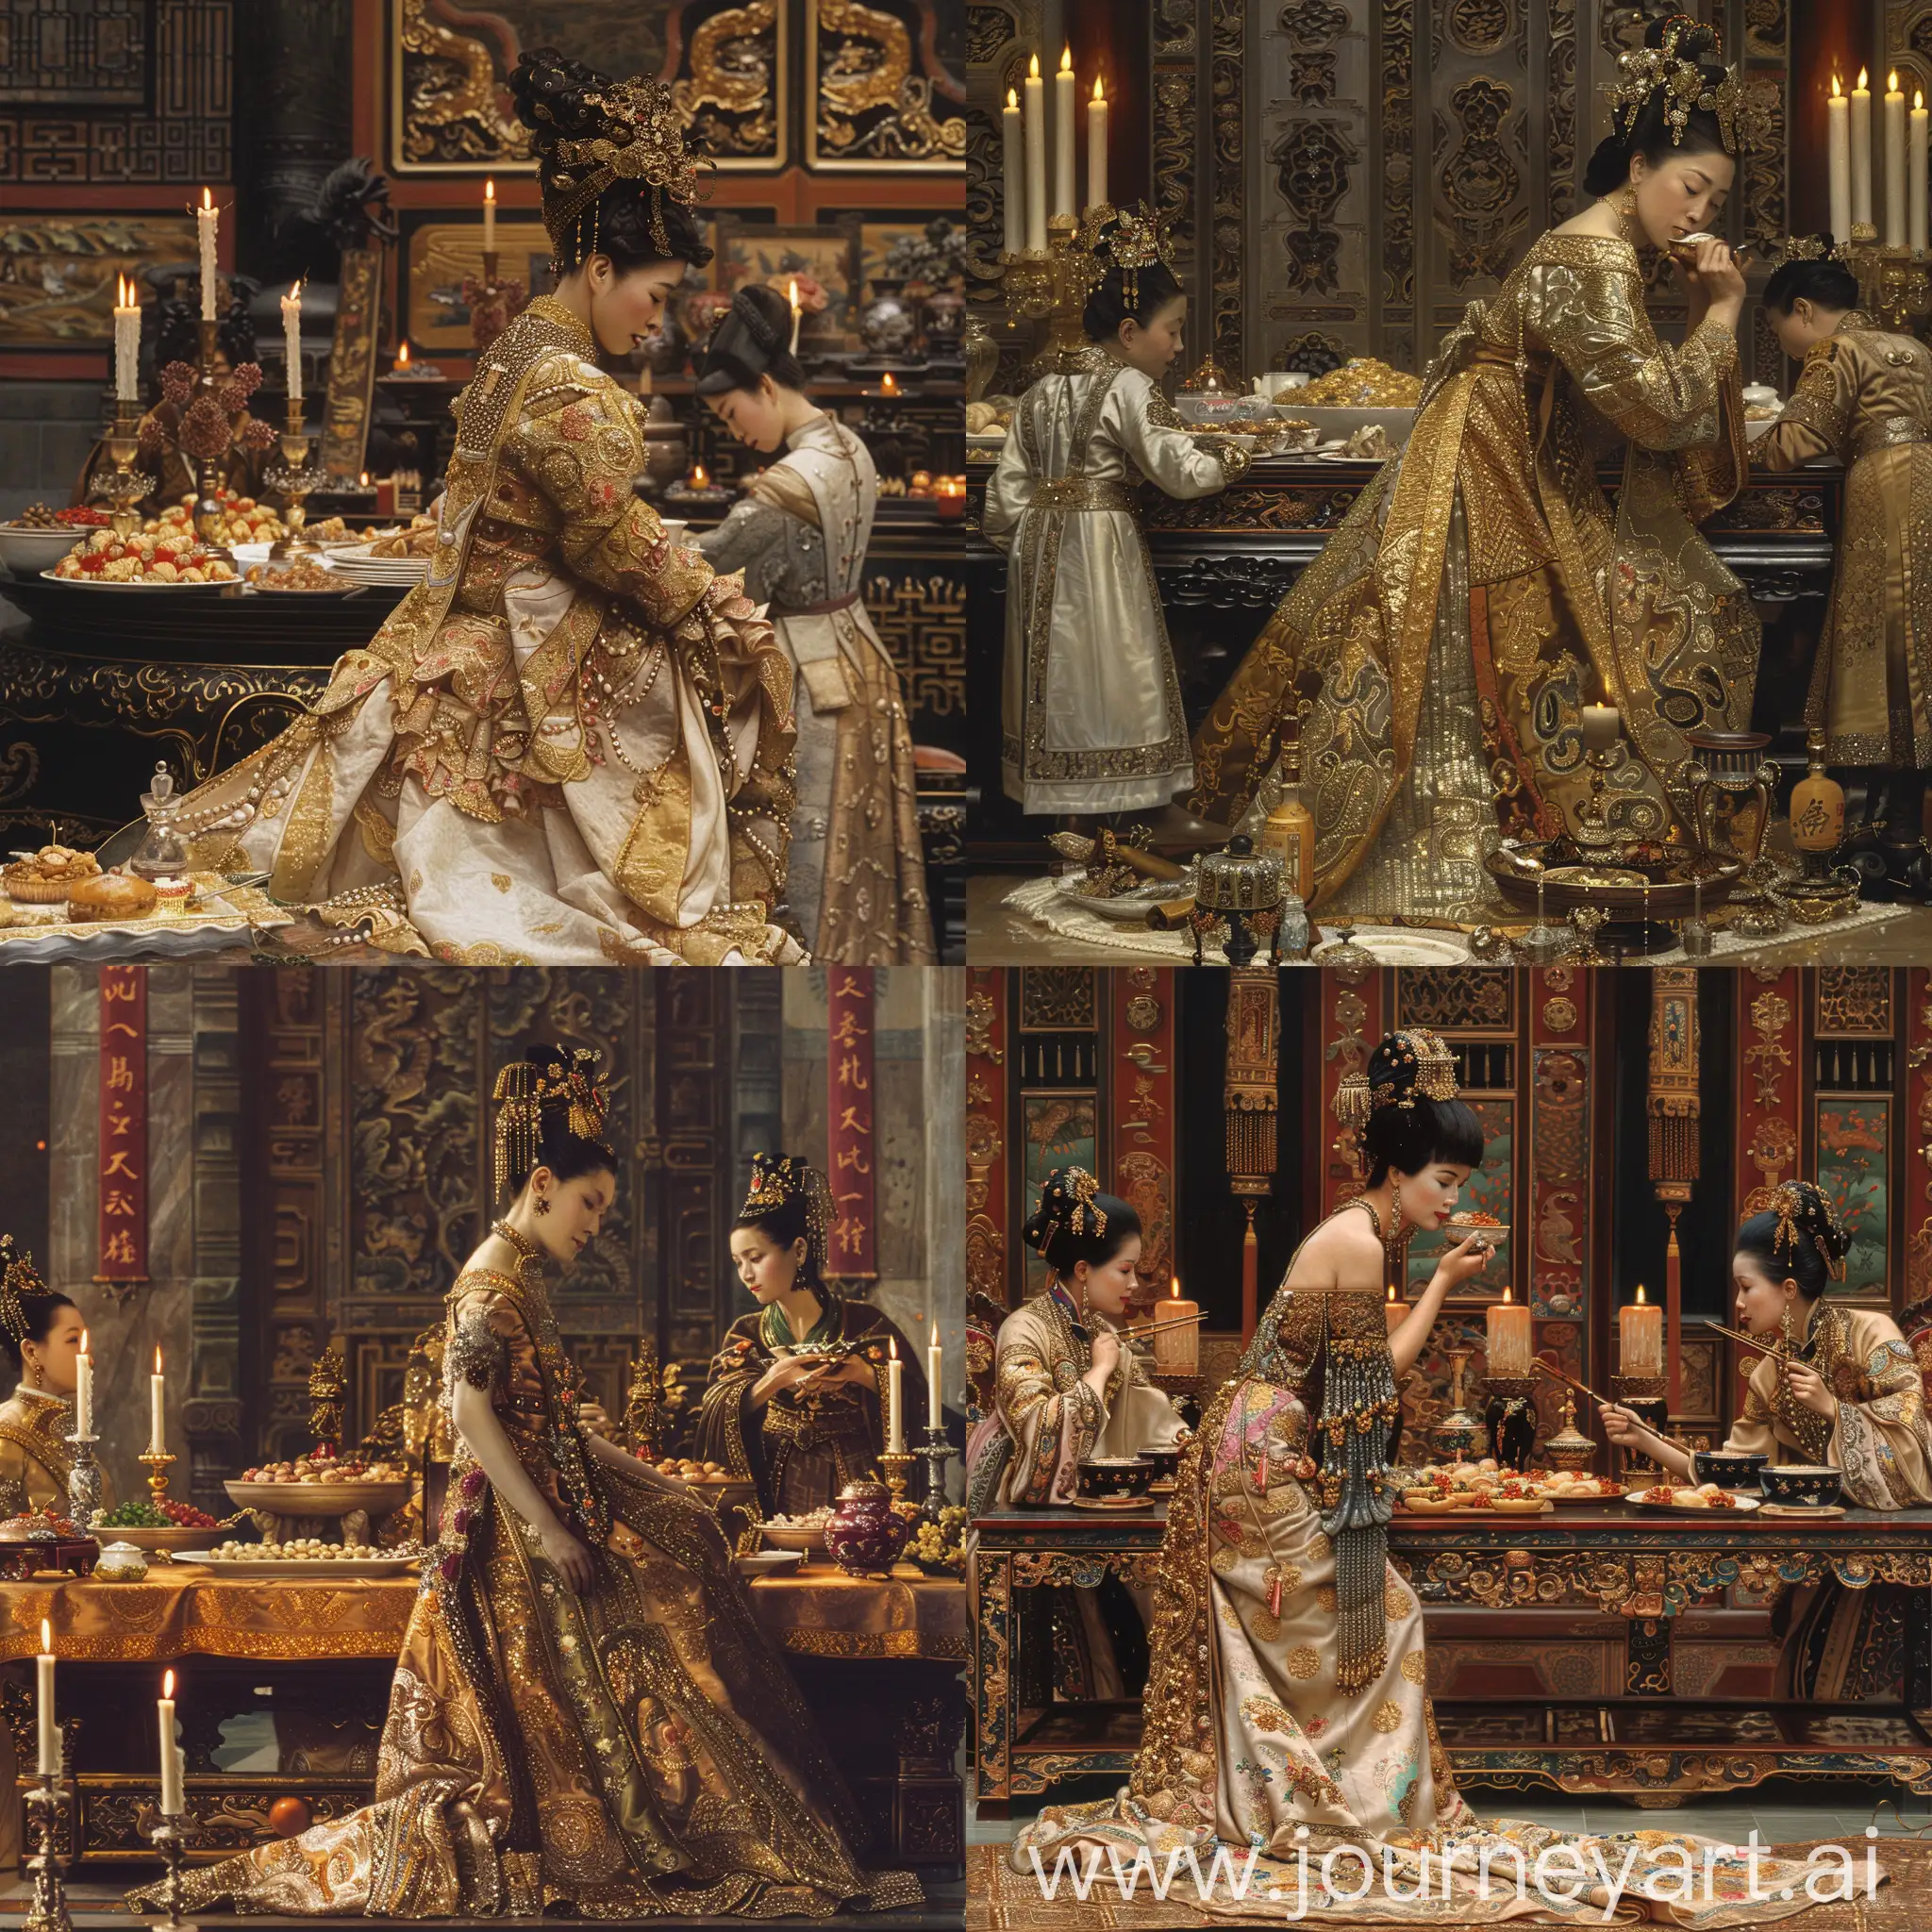 Empress-Dowager-Cixi-Enjoying-a-Sumptuous-Feast-in-the-Palace